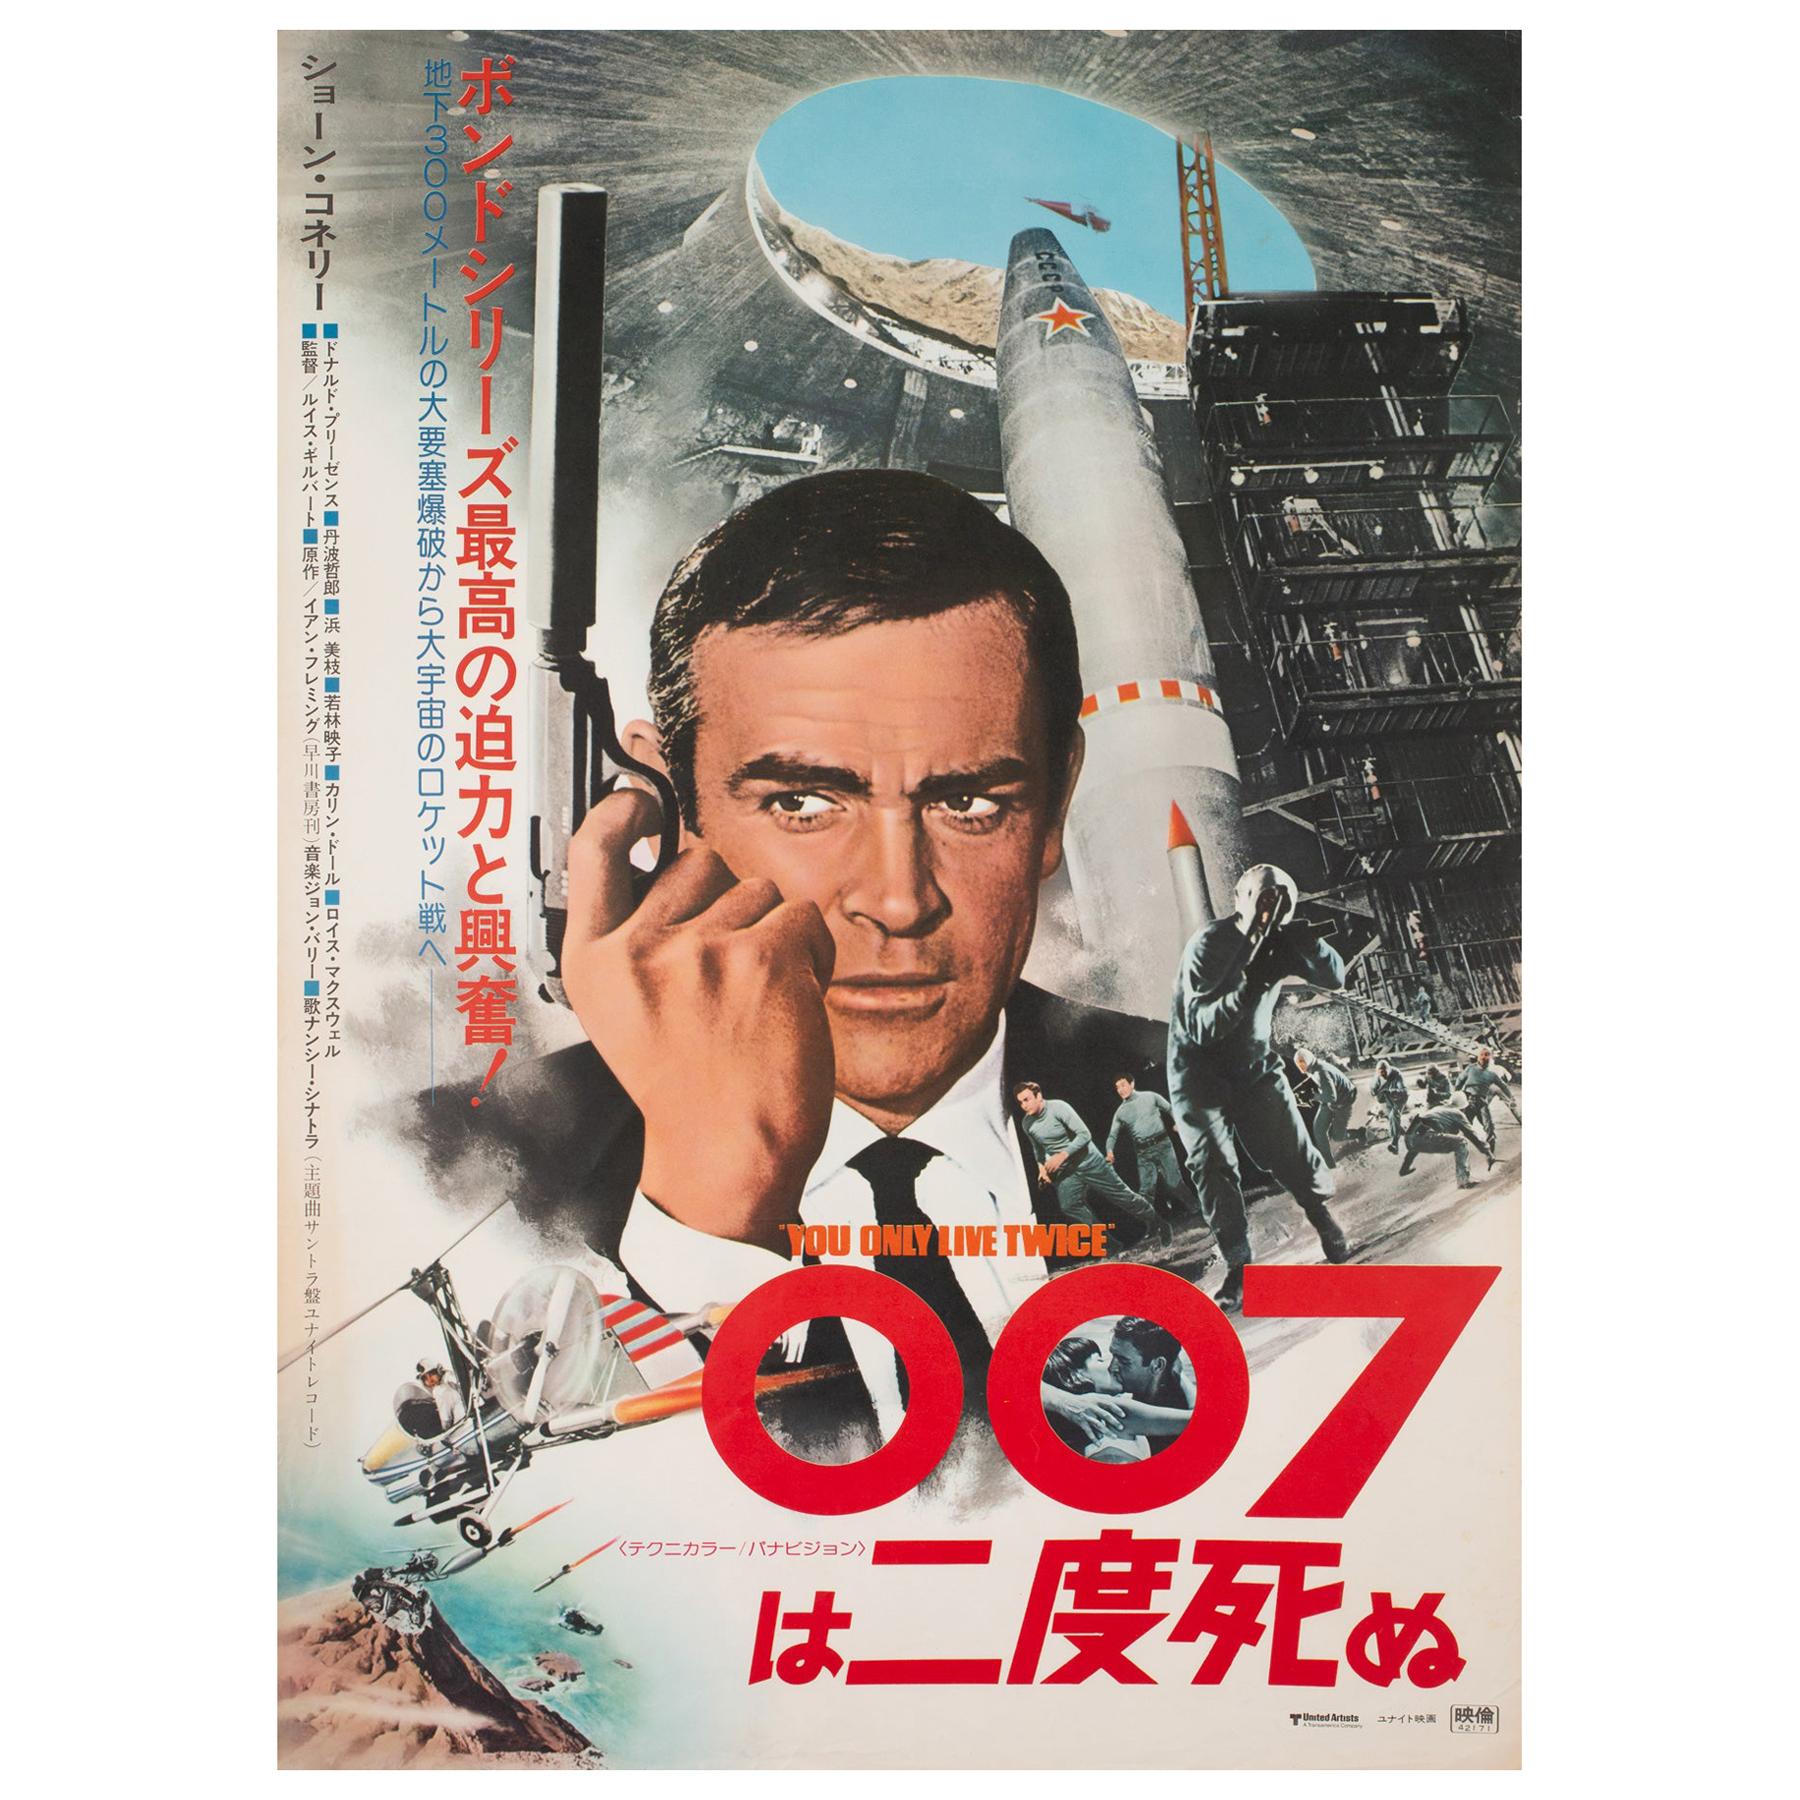 You Only Live Twice R1976 Japanese B2 Film Poster, James Bond